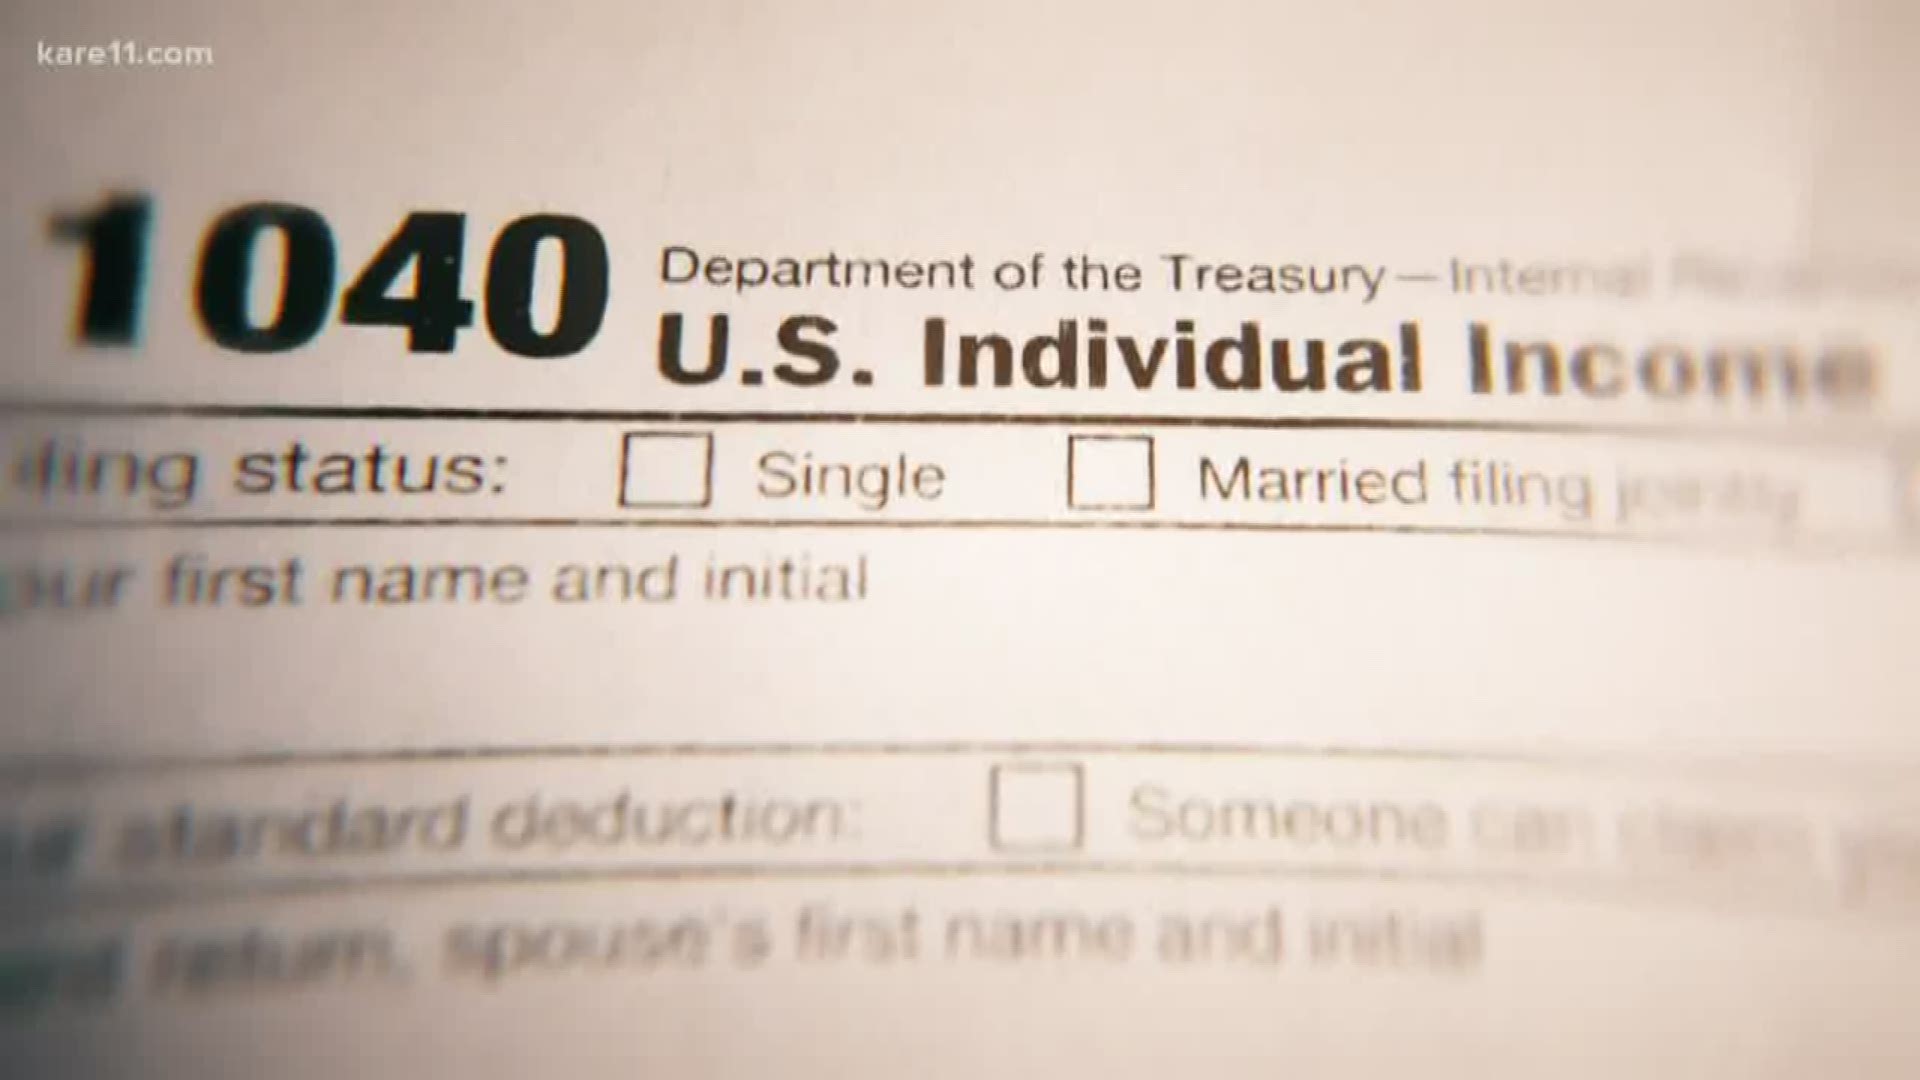 The stimulus checks will show up on your 2020 tax return, but experts say it won't affect any refund you might receive.